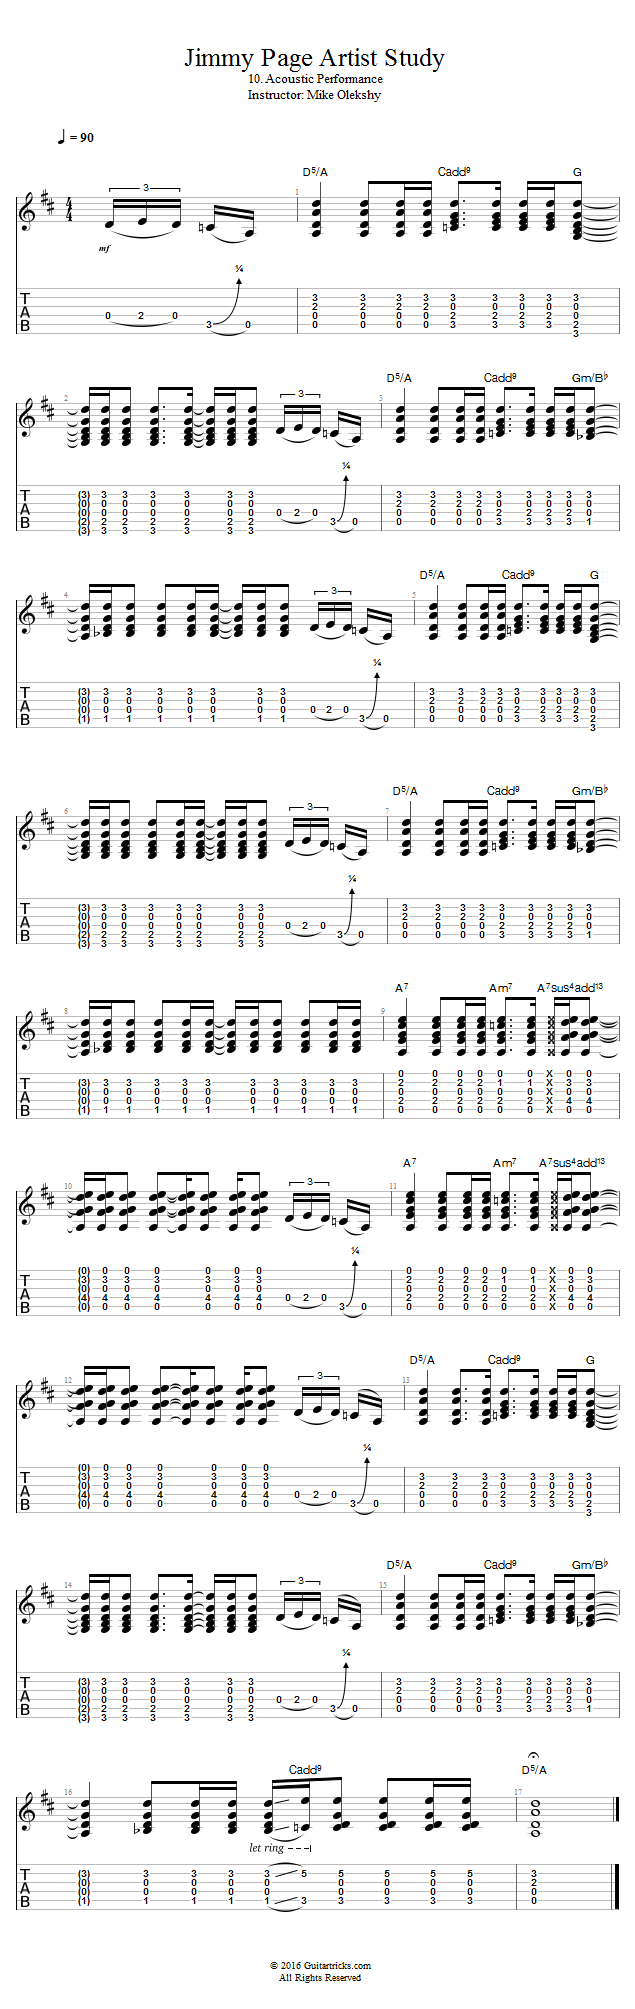 Acoustic Performance song notation